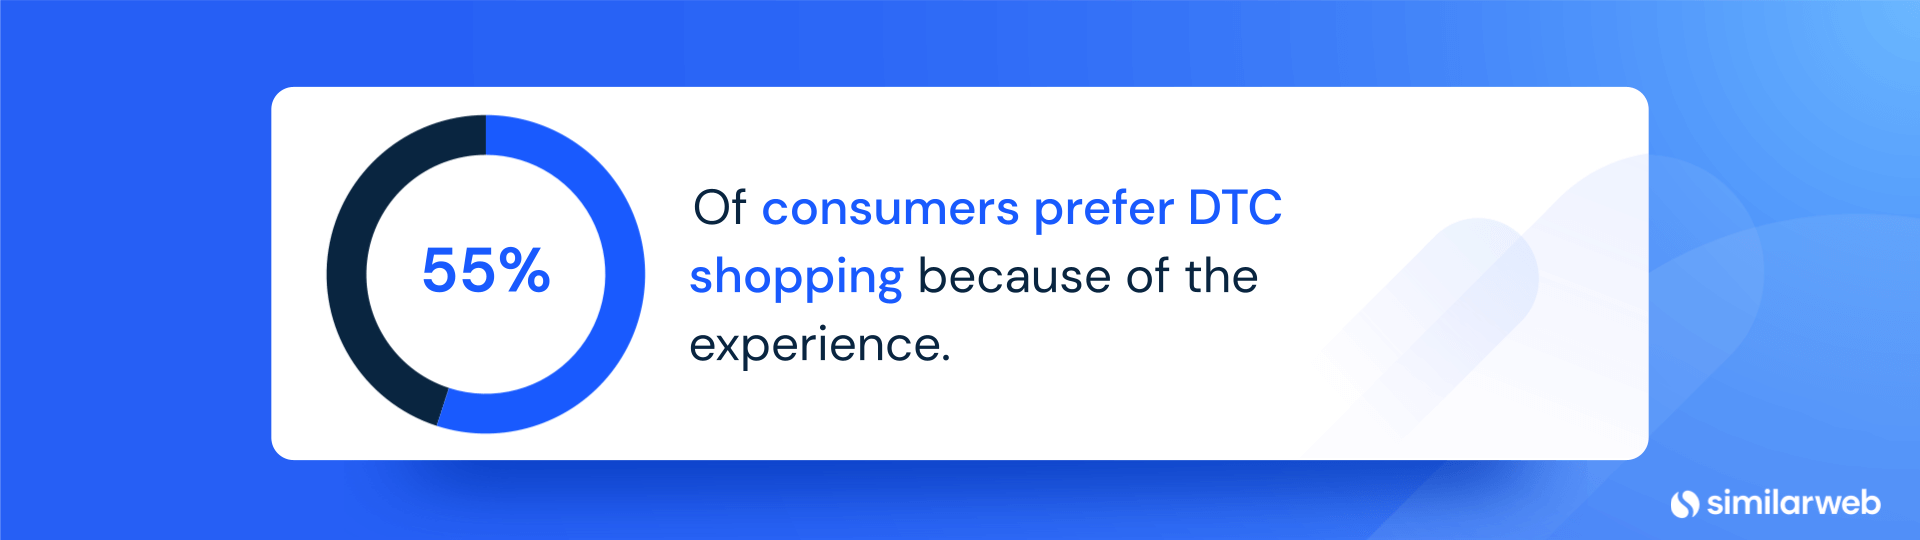 55% of consumers prefer DTC shopping because of the experience.